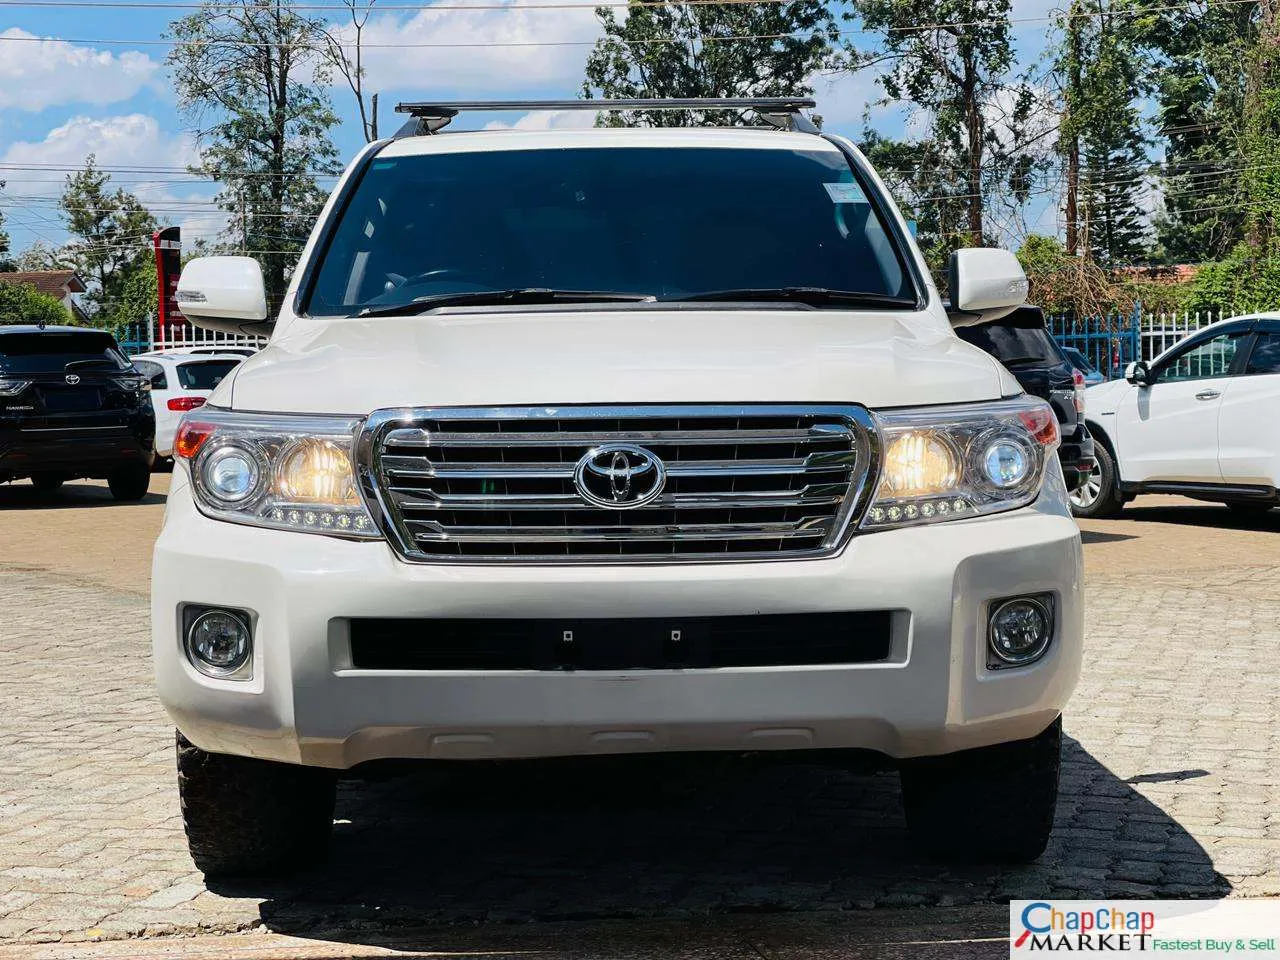 Toyota Land Cruiser VX V8 DIESEL LC 200 SERIES QUICK SALE Trade in Ok EXCLUSIVE HIRE PURCHASE INSTALLMENTS